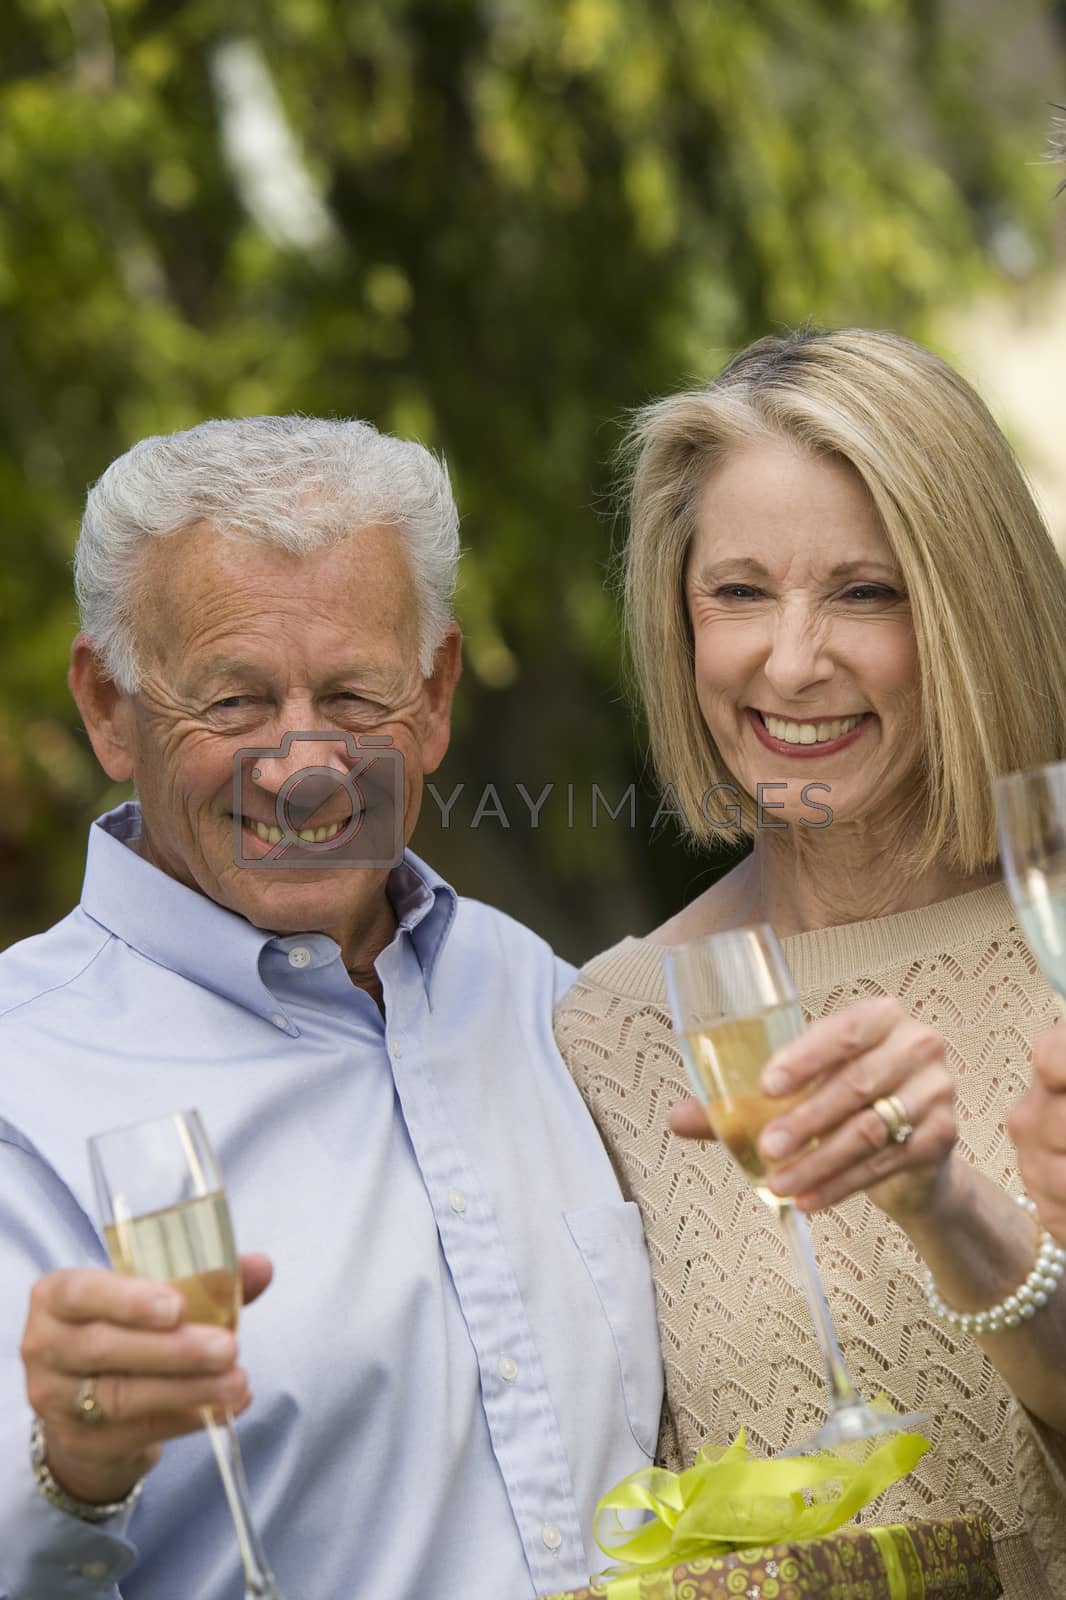 Royalty free image of Happy senior couple standing together while holding glass of champagne by moodboard